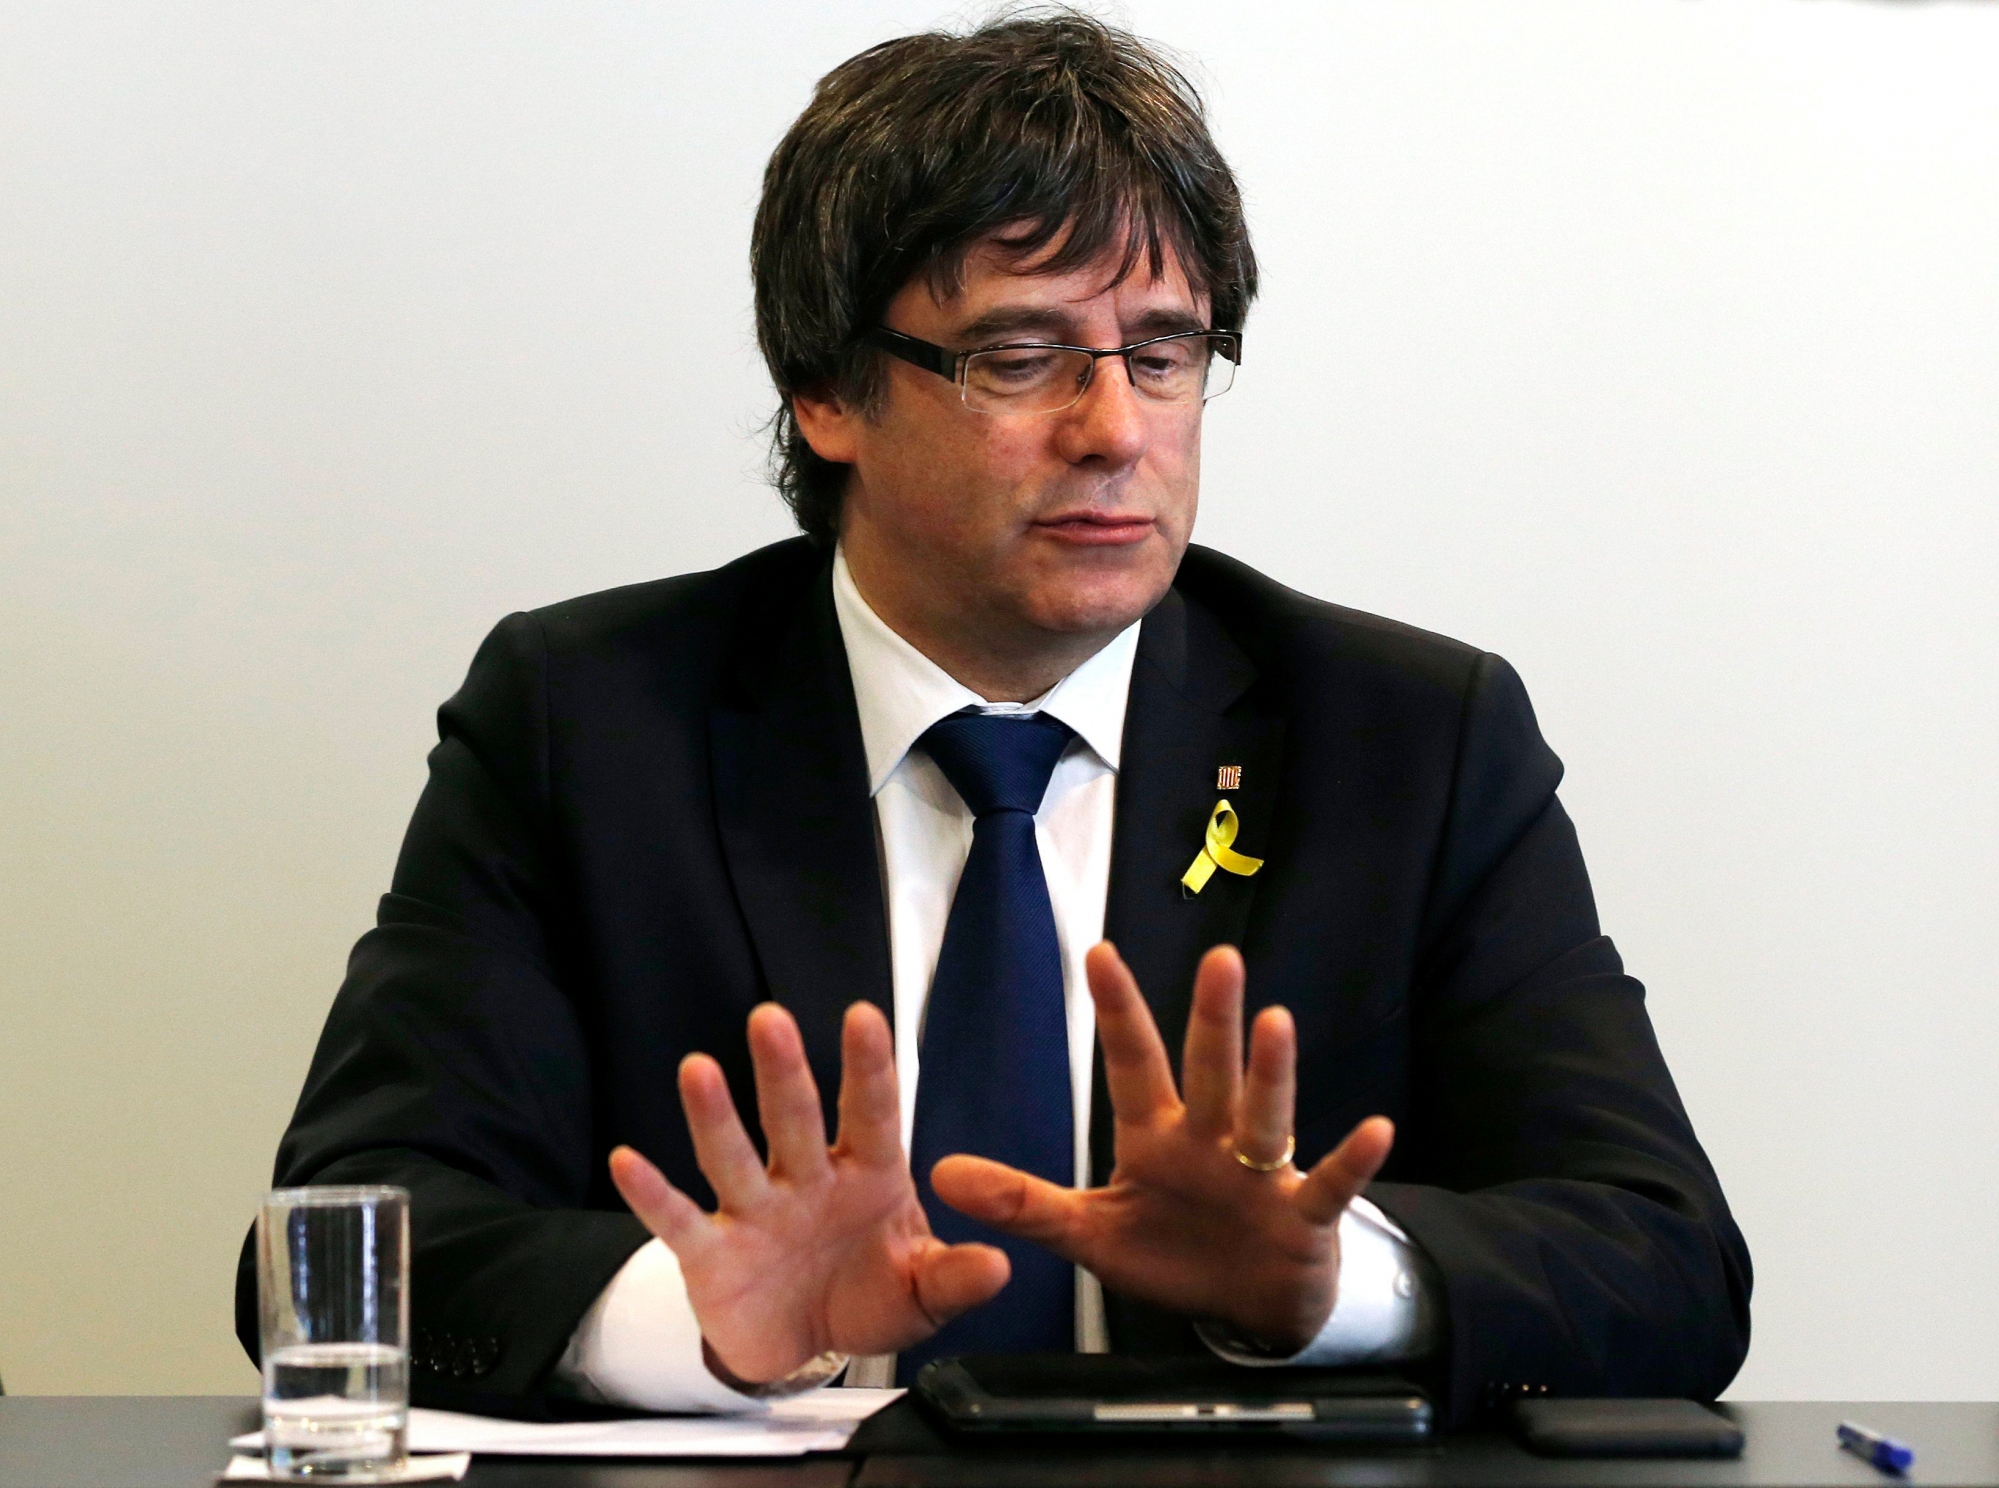 epa06676577 Former Catalan president Carles Puigdemont looks on during a working meeting with members of his parliamentary group, Junts per Catalunya, in Berlin, Germany, 18 April 2018. Puigdemont and the Catalan political platform centered around him discussed further plans on proposing a president for the Catalonian Government and avoid new elections. Puigdemont resides in Berlin because he is still formally in detention and may not leave Germany until German justice decides on his extradition to Spain according to a European arrest warrant.  EPA/FELIPE TRUEBA GERMANY CATALONIA PUIGDEMONT